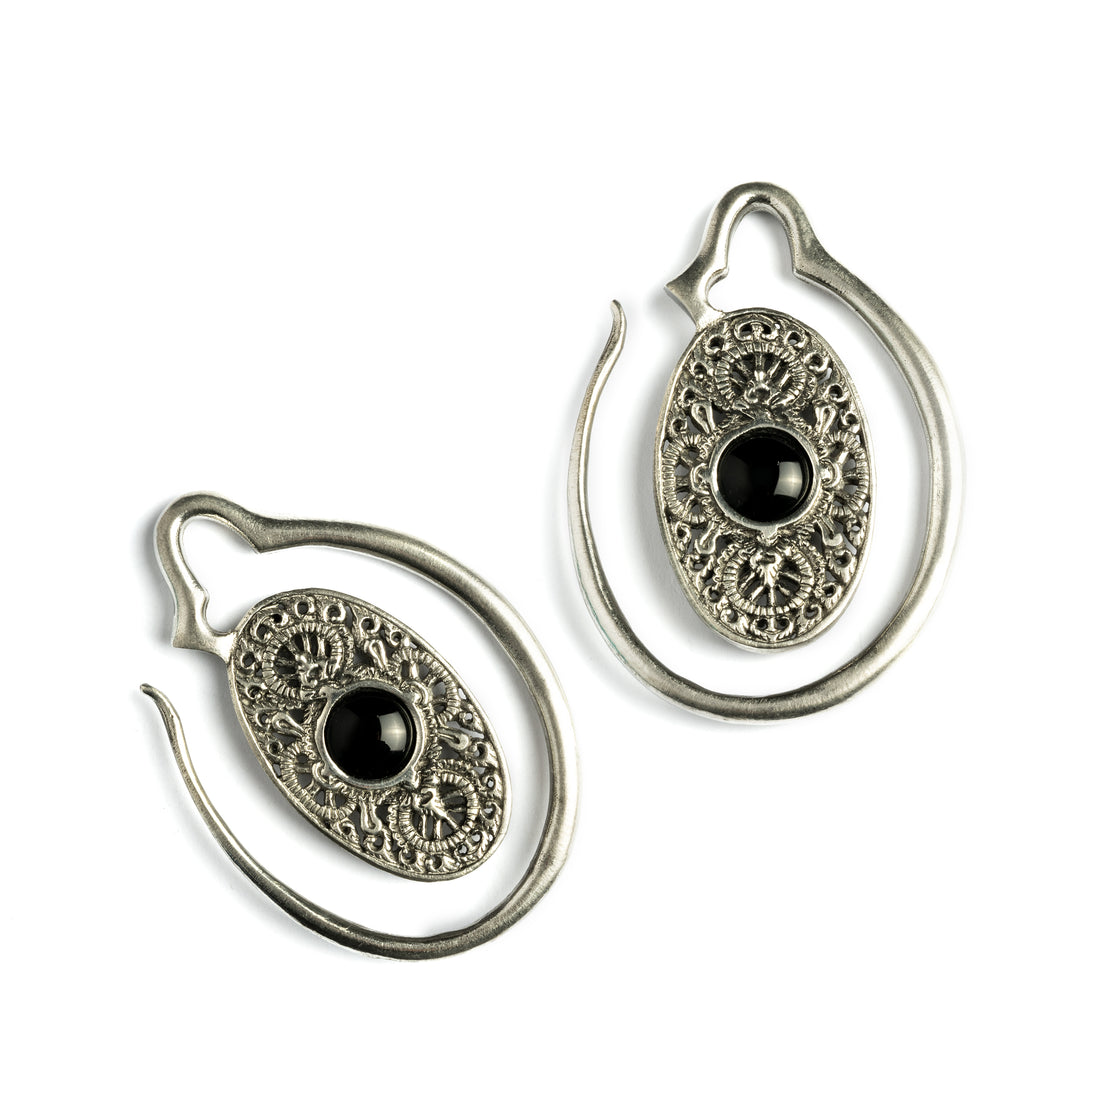 pair of large ear weights hangers, silver colour oval shaped with intricate filigree pattern an black onyx